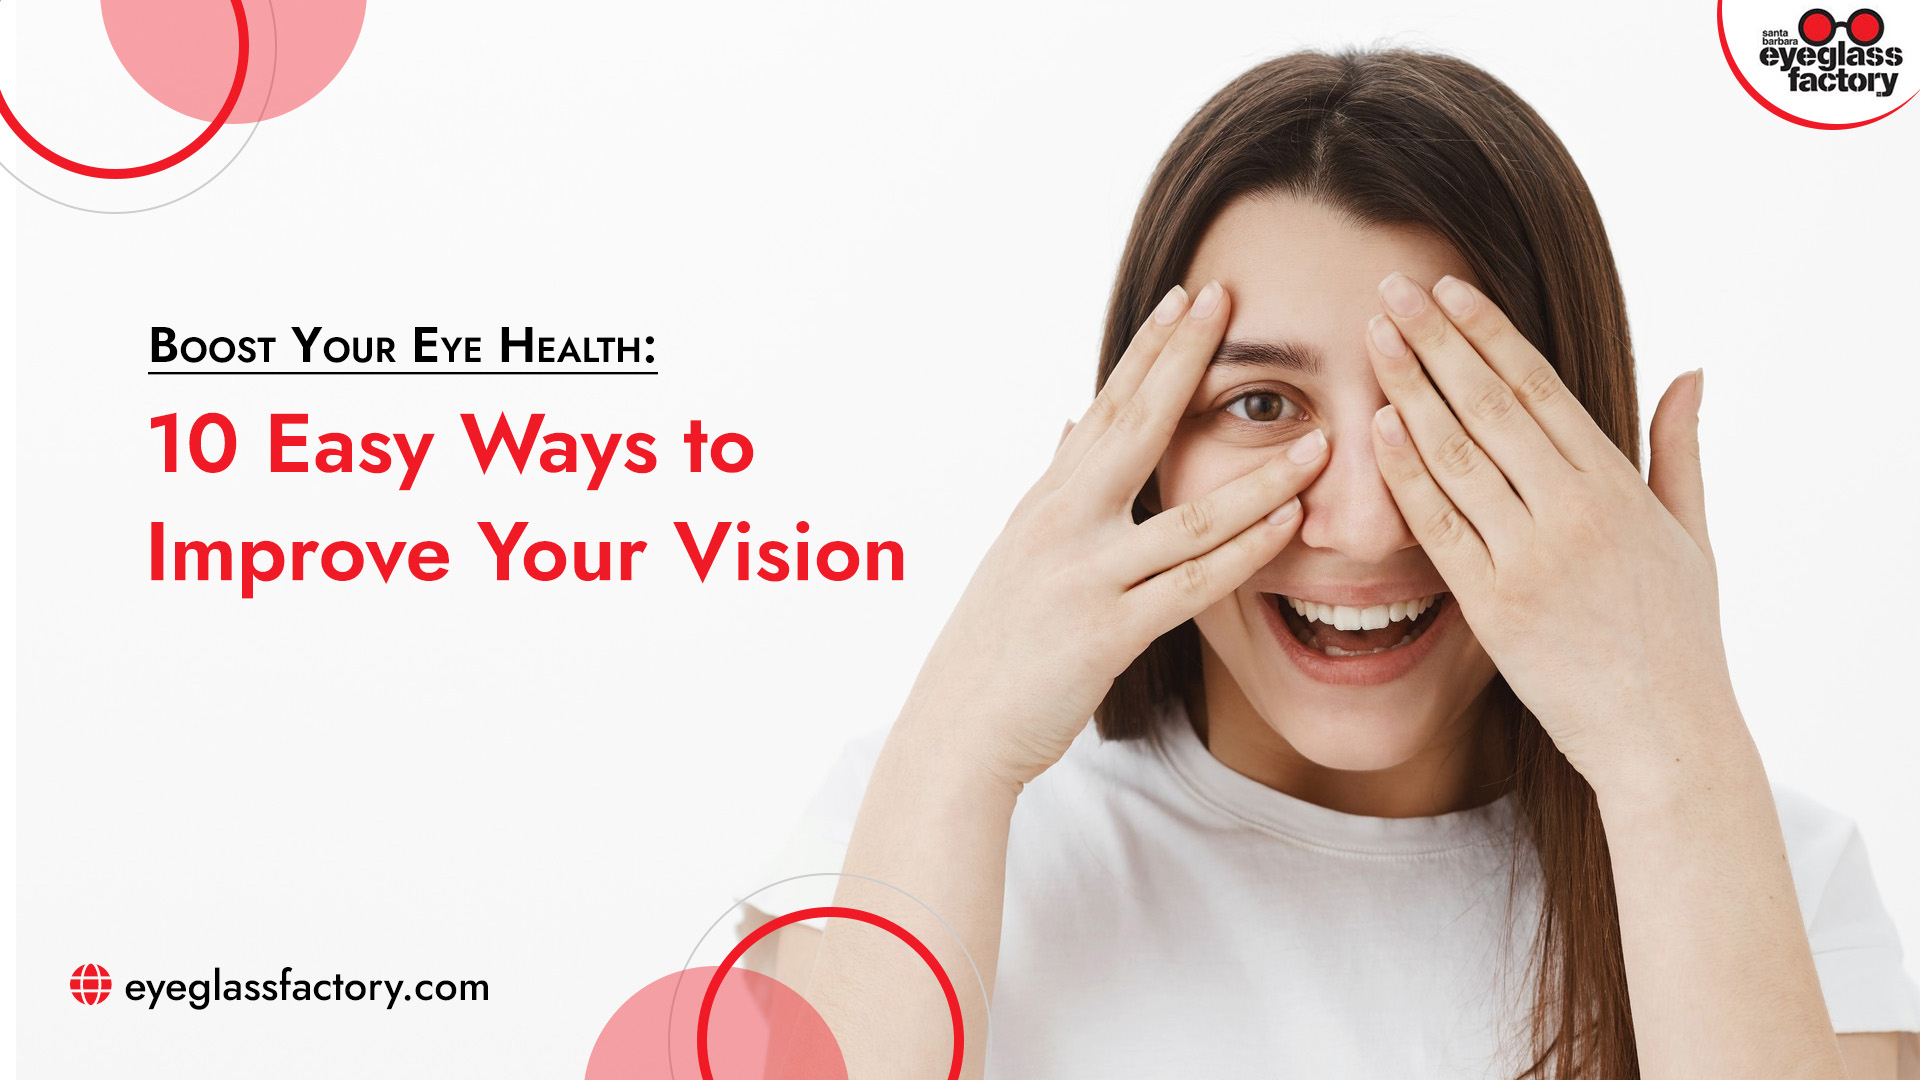 10 Easy Ways to Improve Your Vision